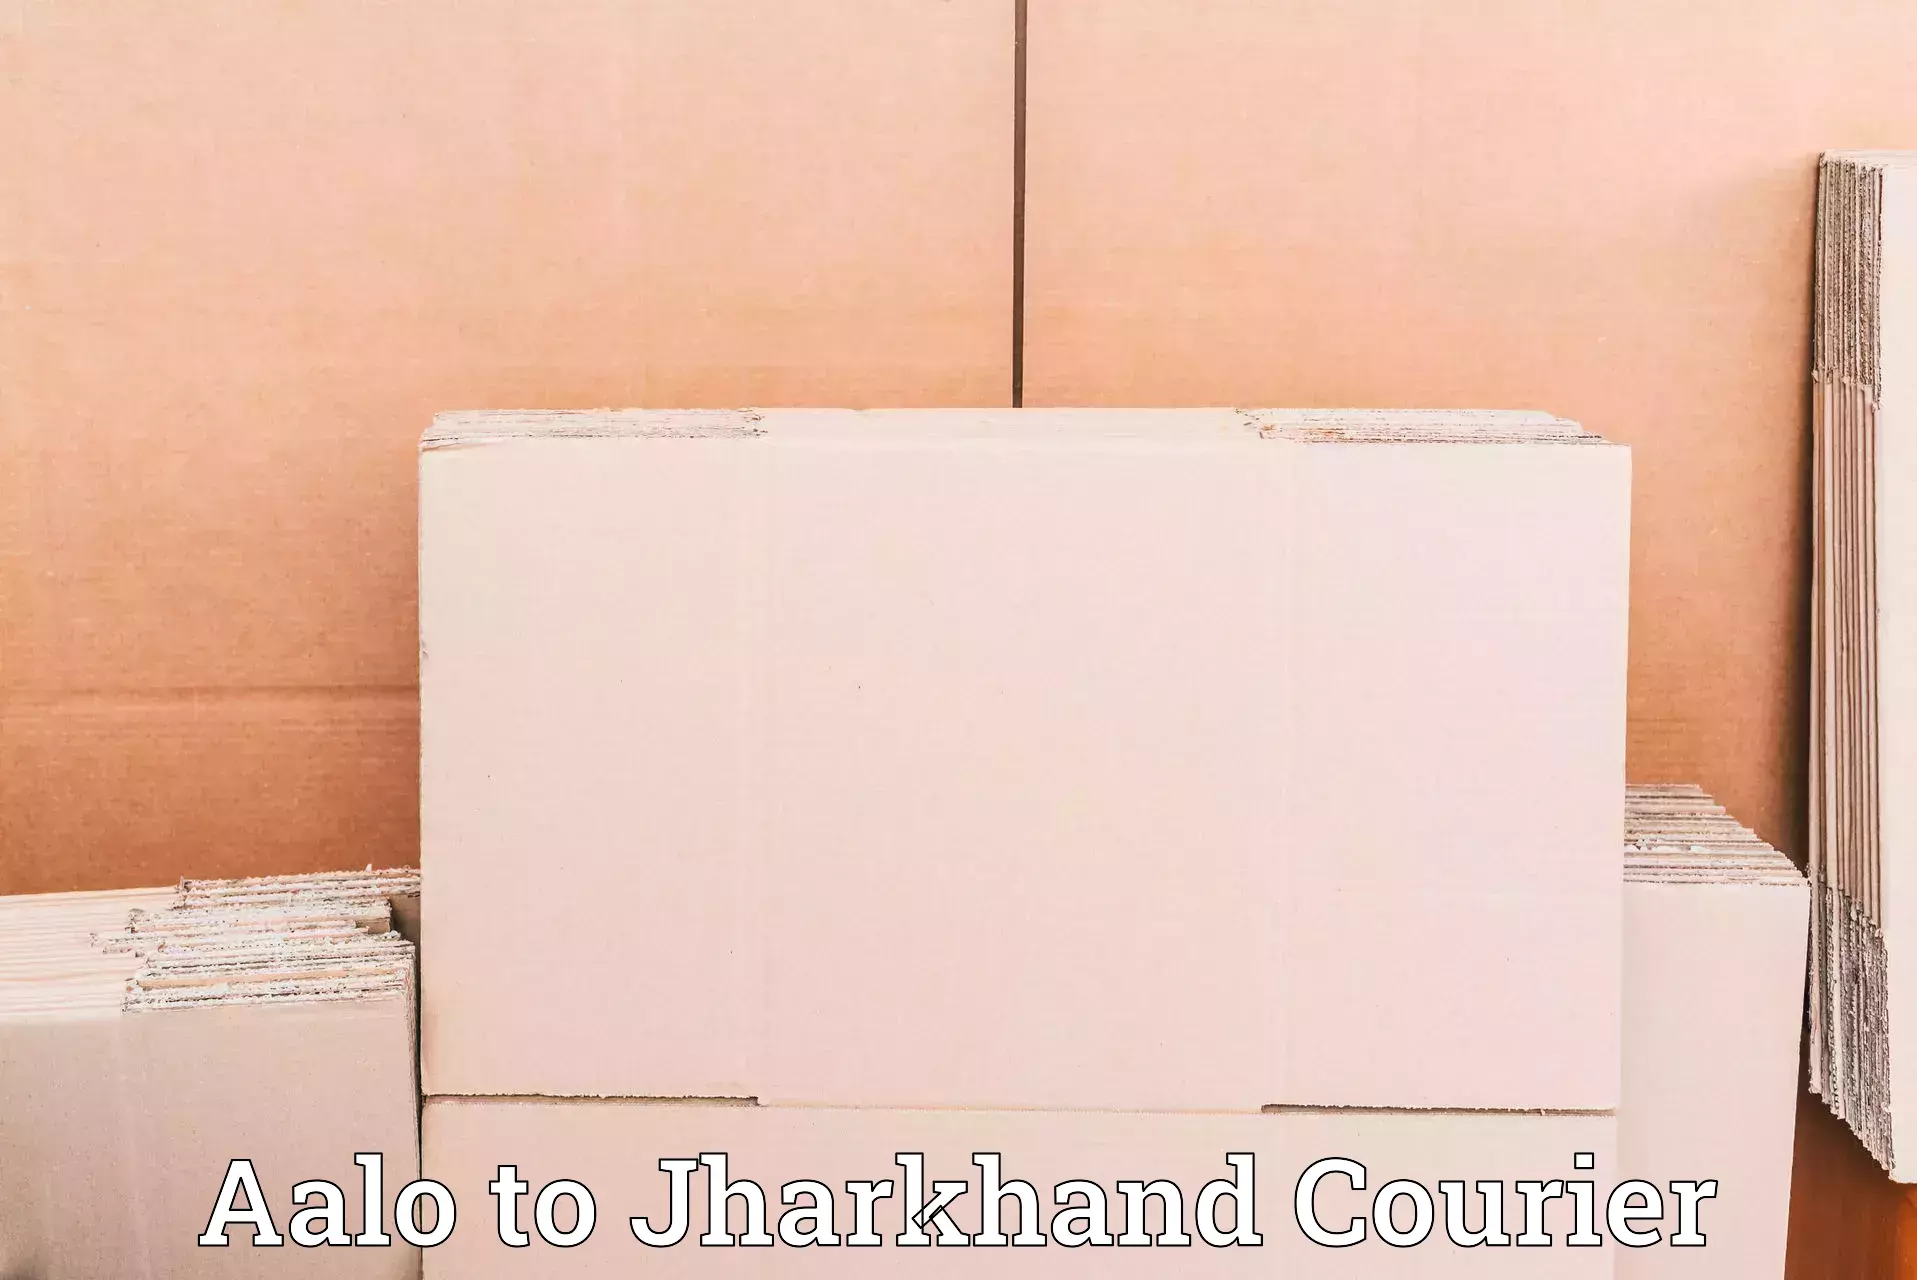 User-friendly courier app Aalo to Dhanbad